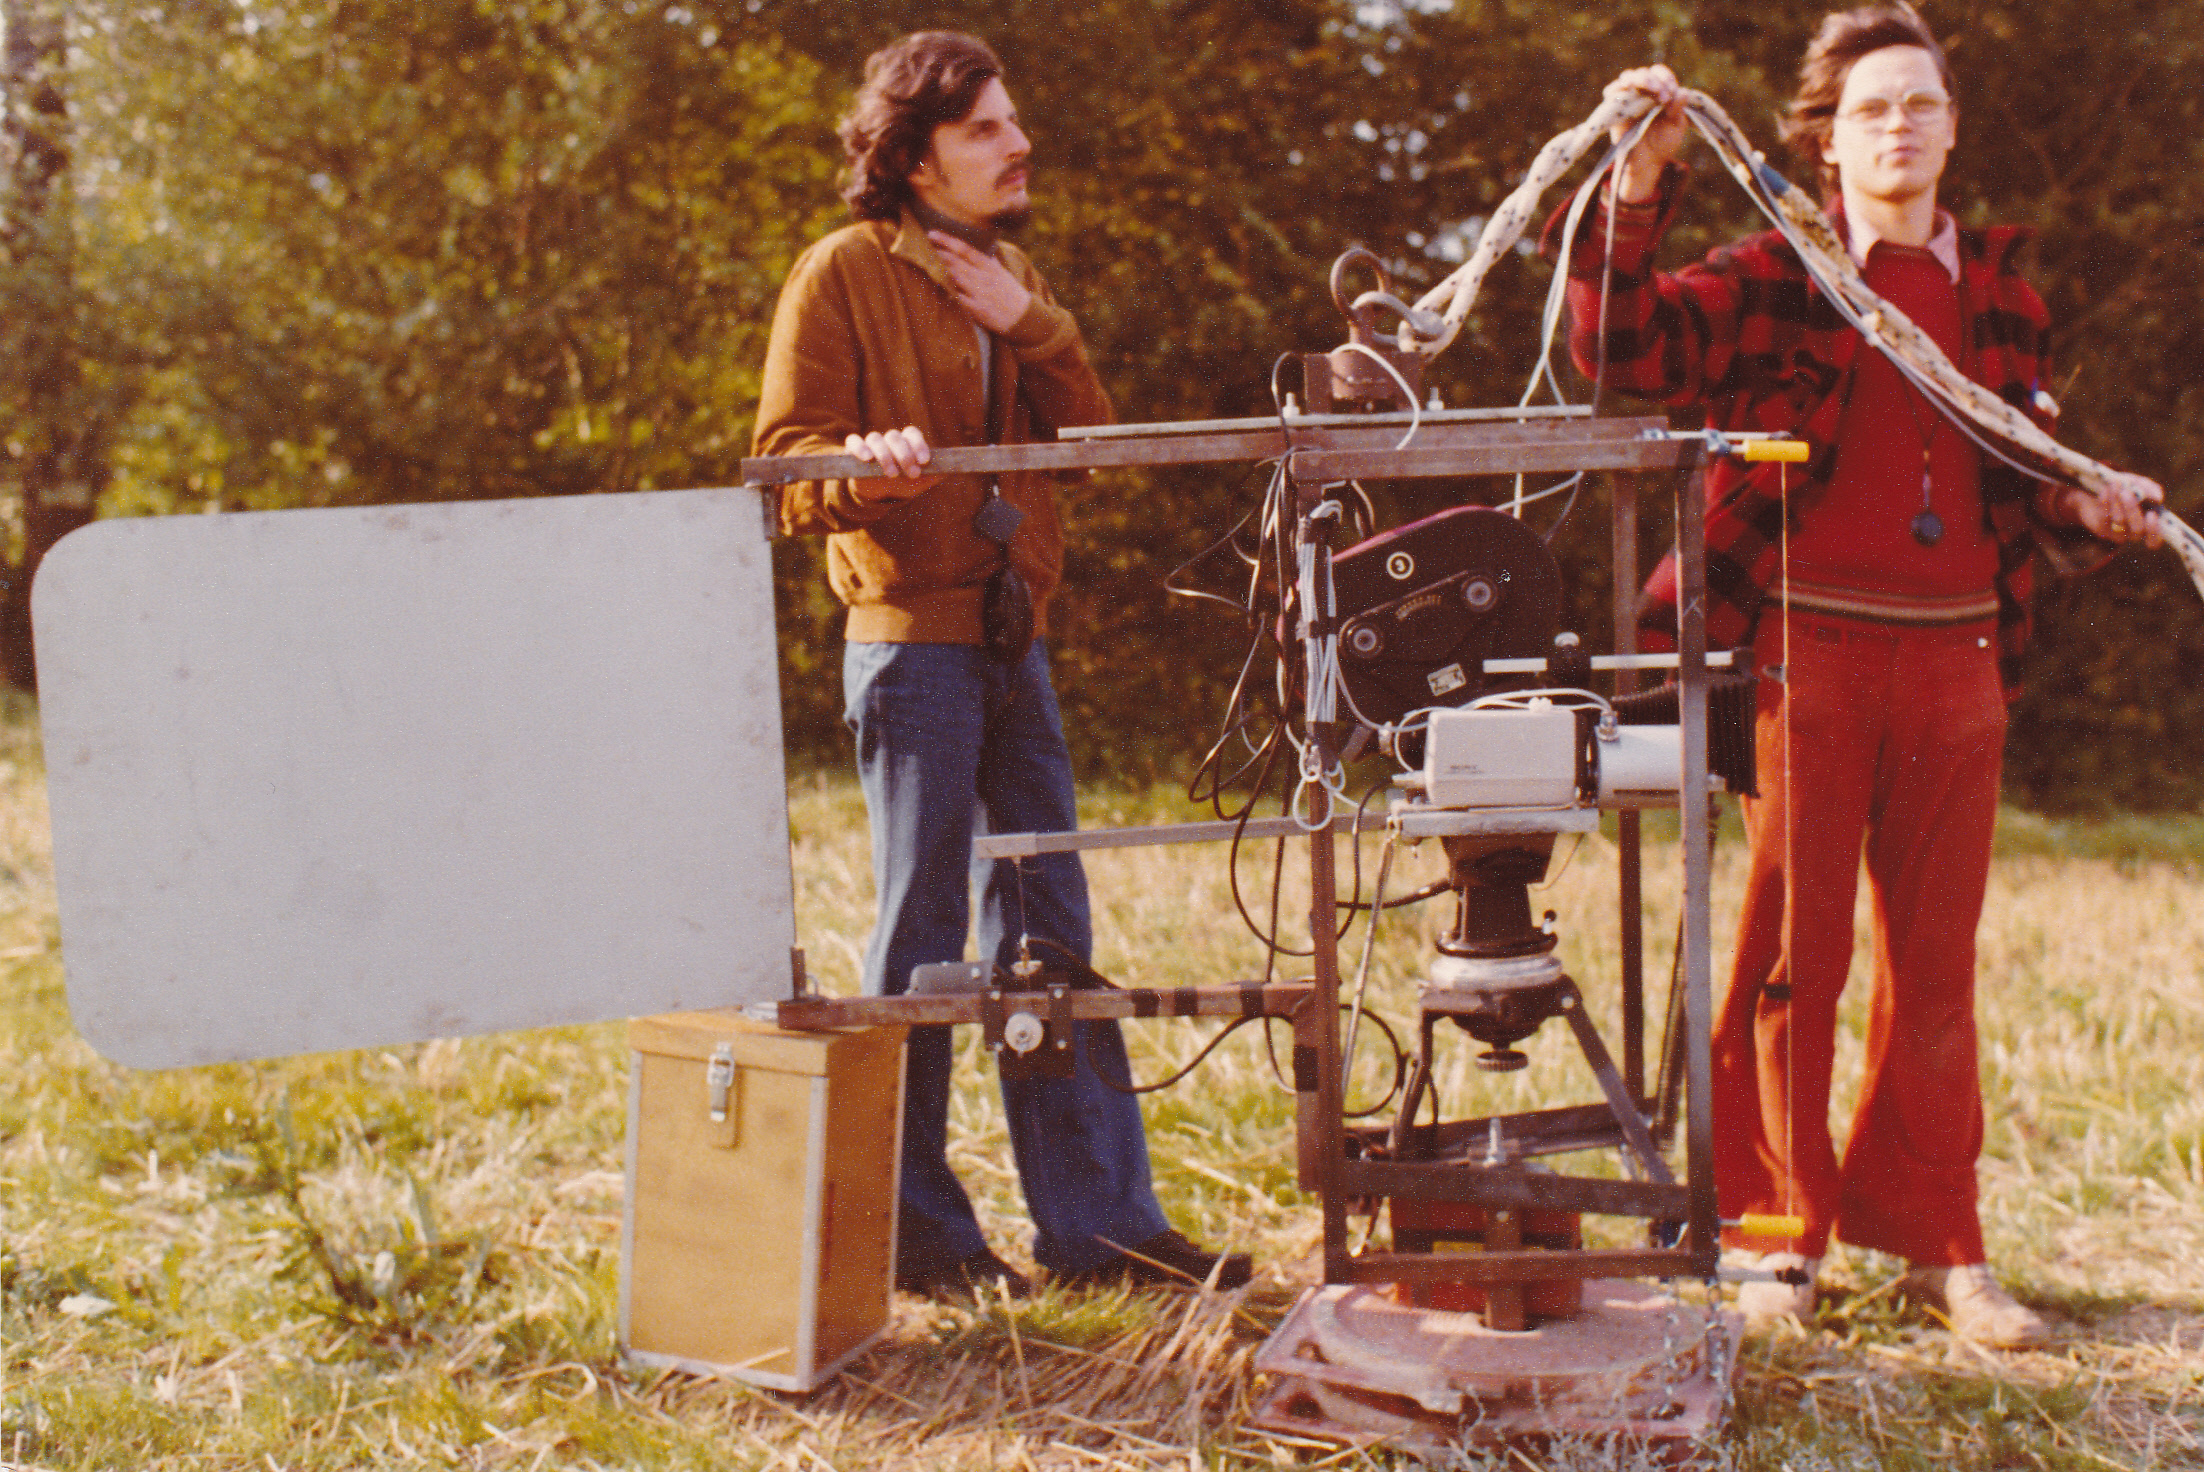 On the set of Les petites fugues in 1977 : "The flight of Pipe"